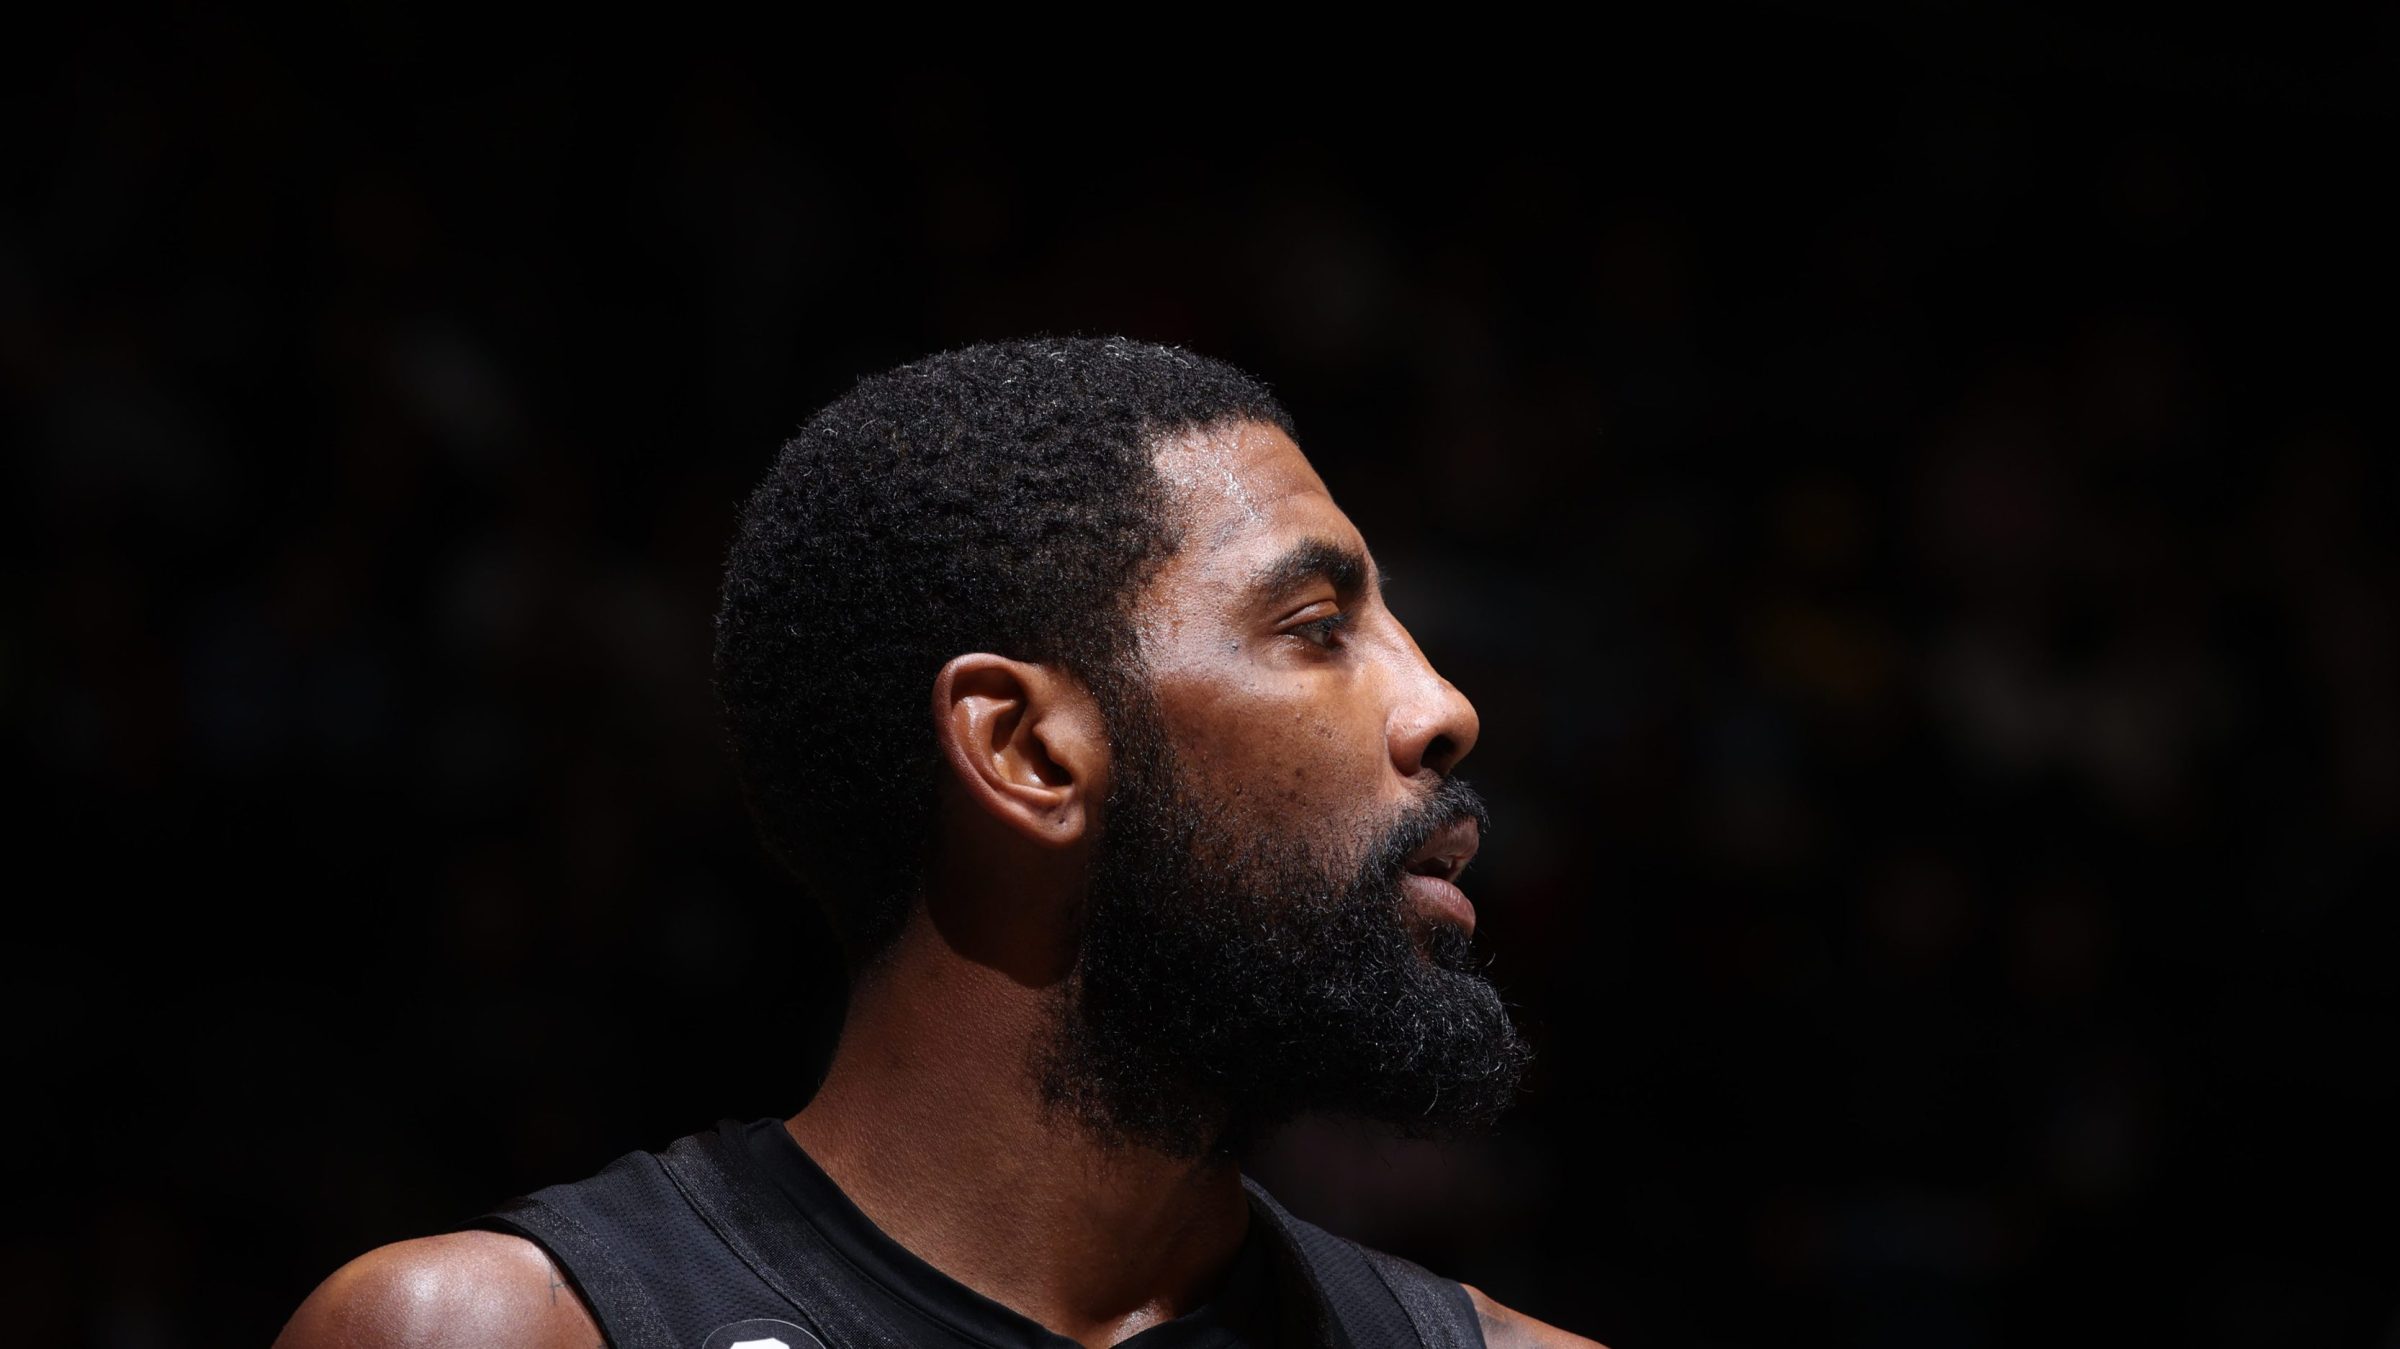 Kyrie Irving #11 of the Brooklyn Nets looks on during the game against the Indiana Pacers on October 31, 2022 at Barclays Center in Brooklyn, New York. The image is zoomed in on his face, which is turned to one side, and behind him is all black.